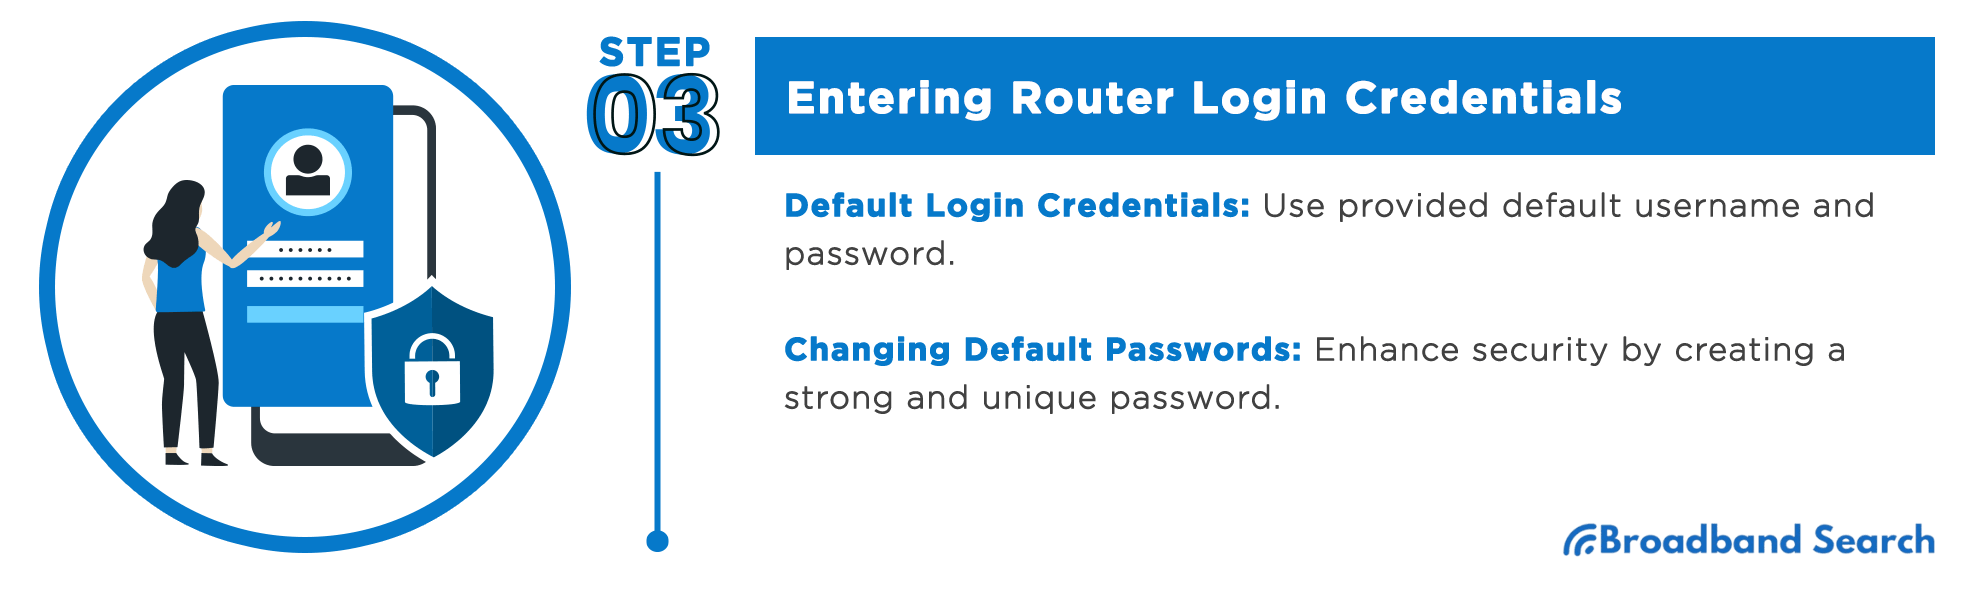 Instructions on how to enter router login credentials